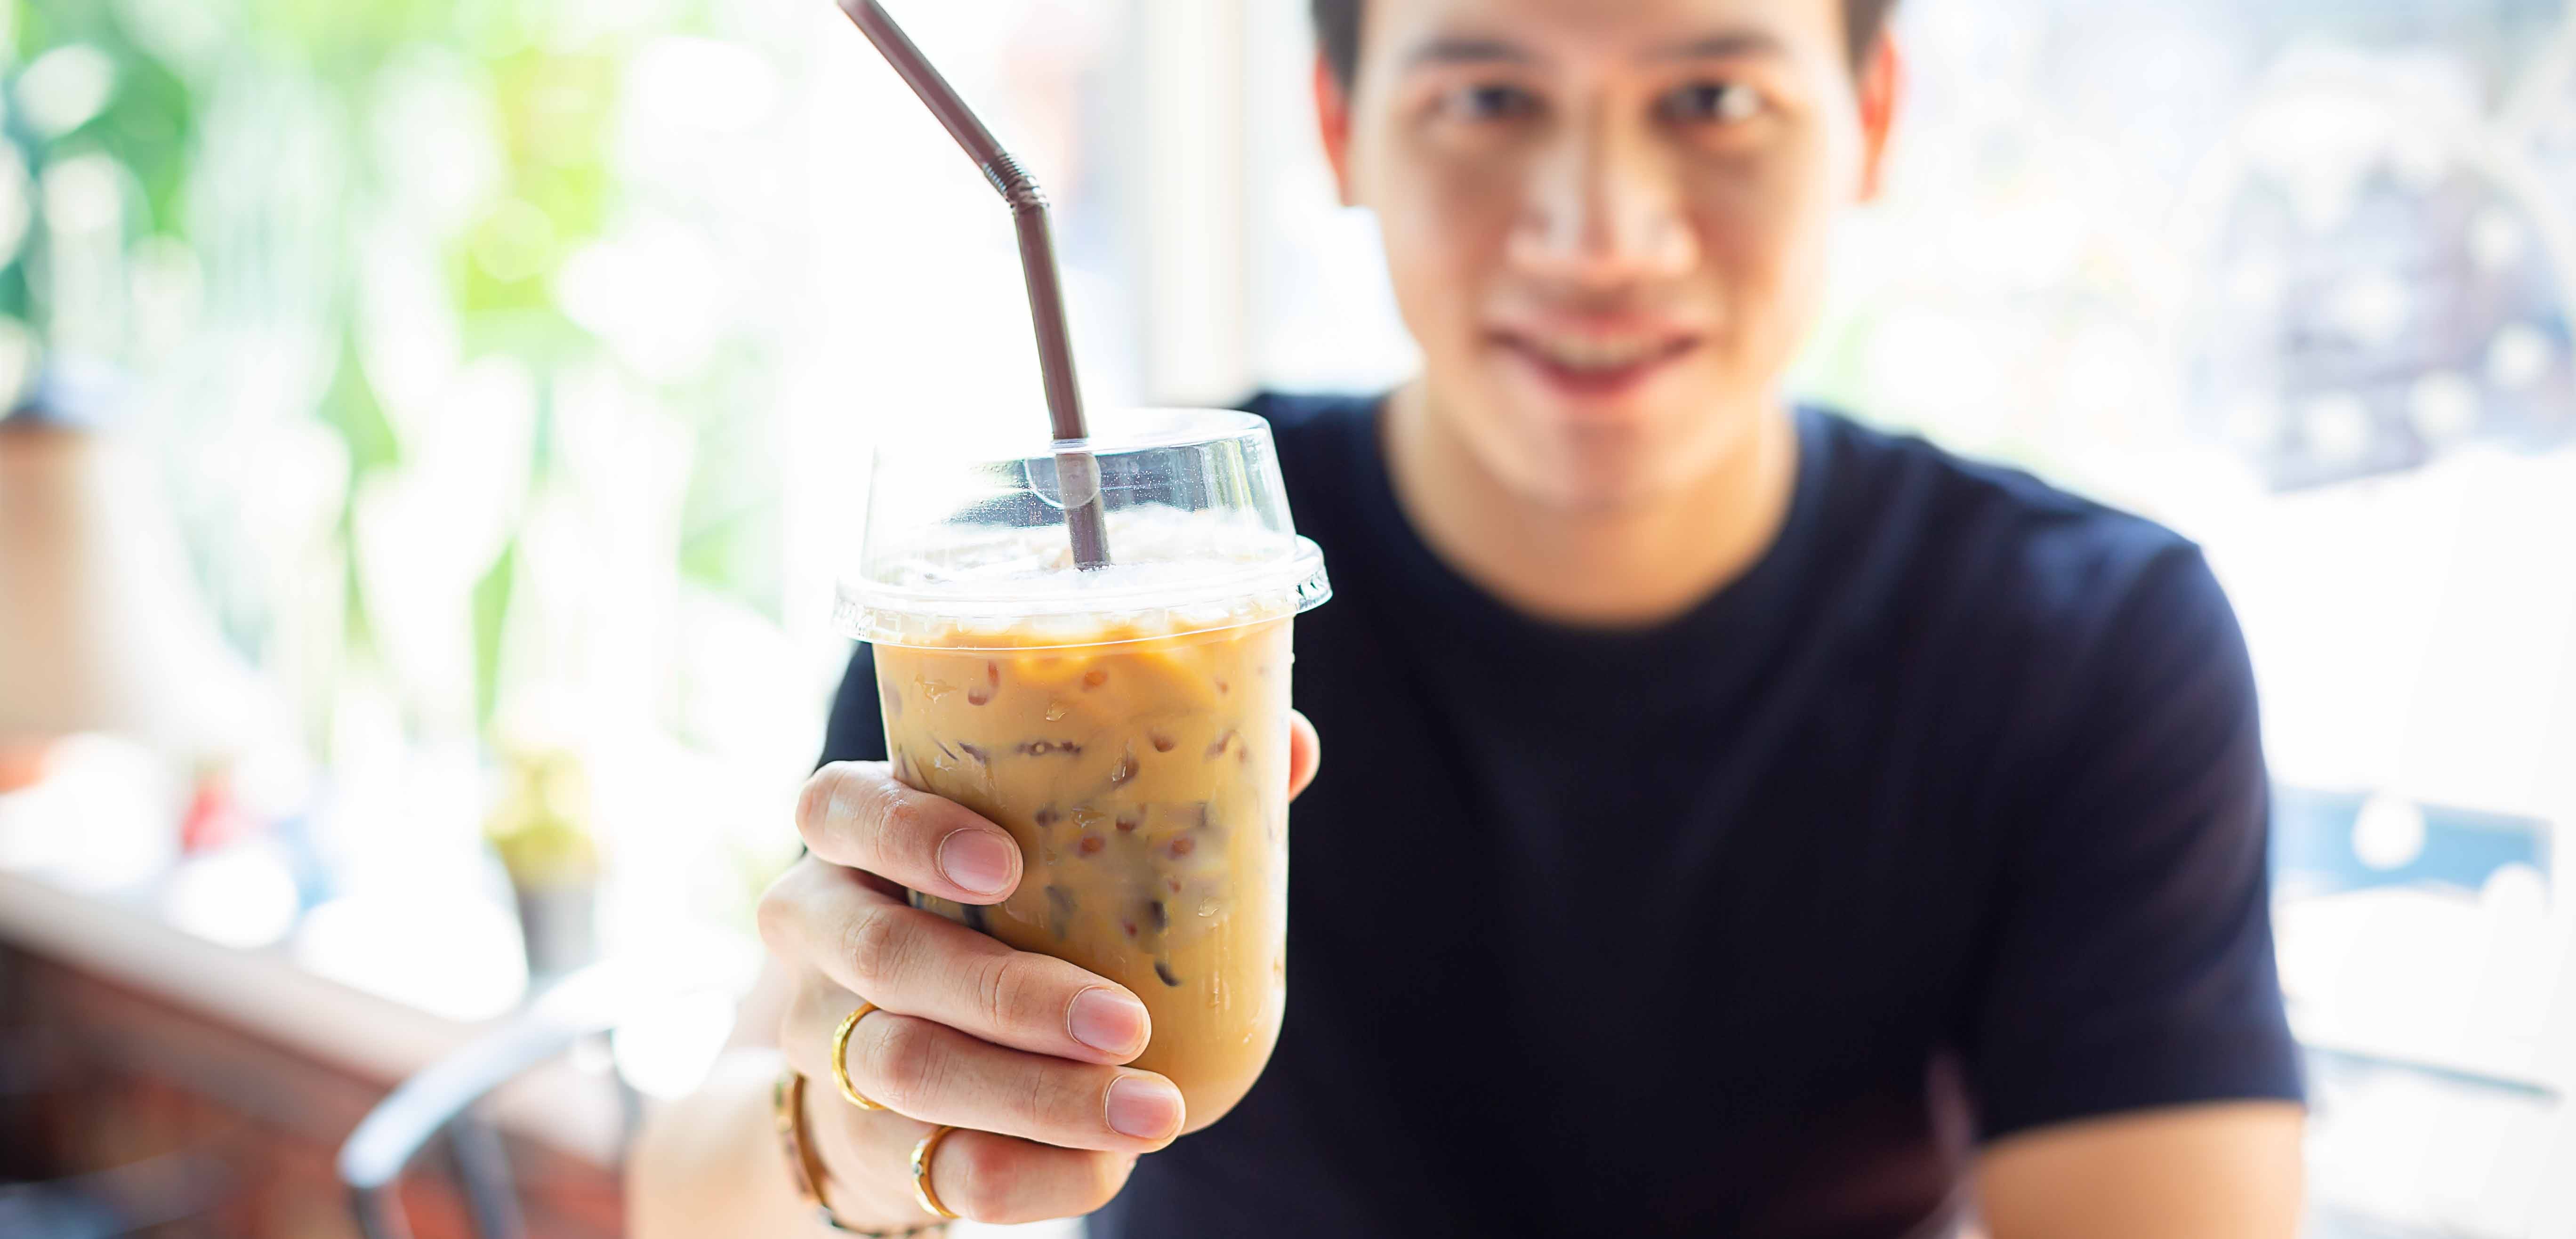 Cold-brew or iced coffee? How much caffeine and which healthier